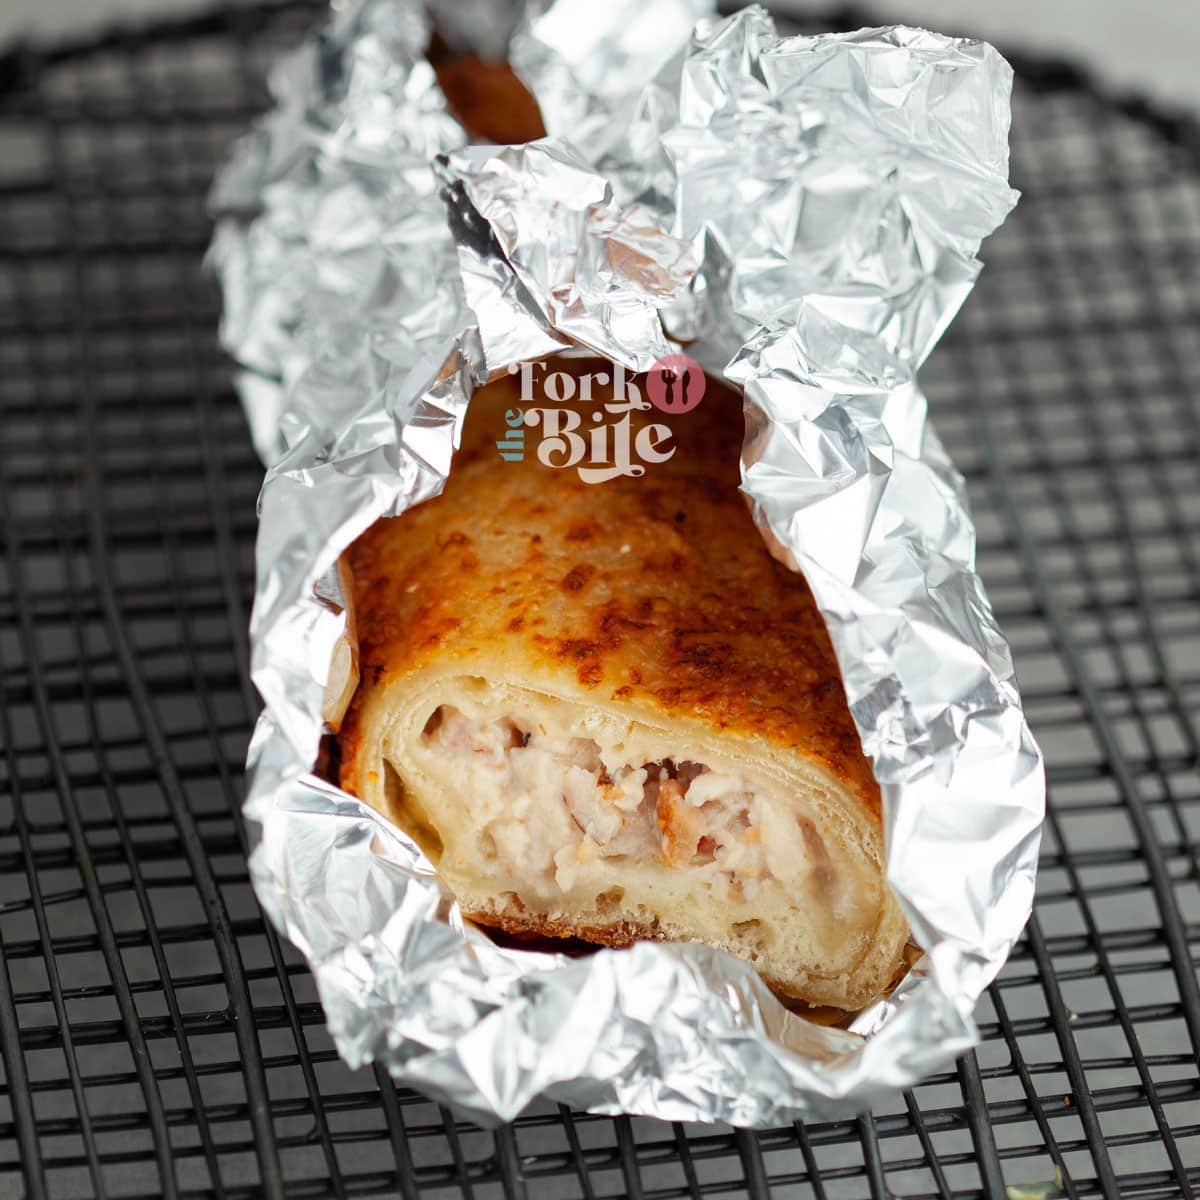 Loosely cover the chicken bakes with a piece of aluminum foil to protect the top layer from burning.